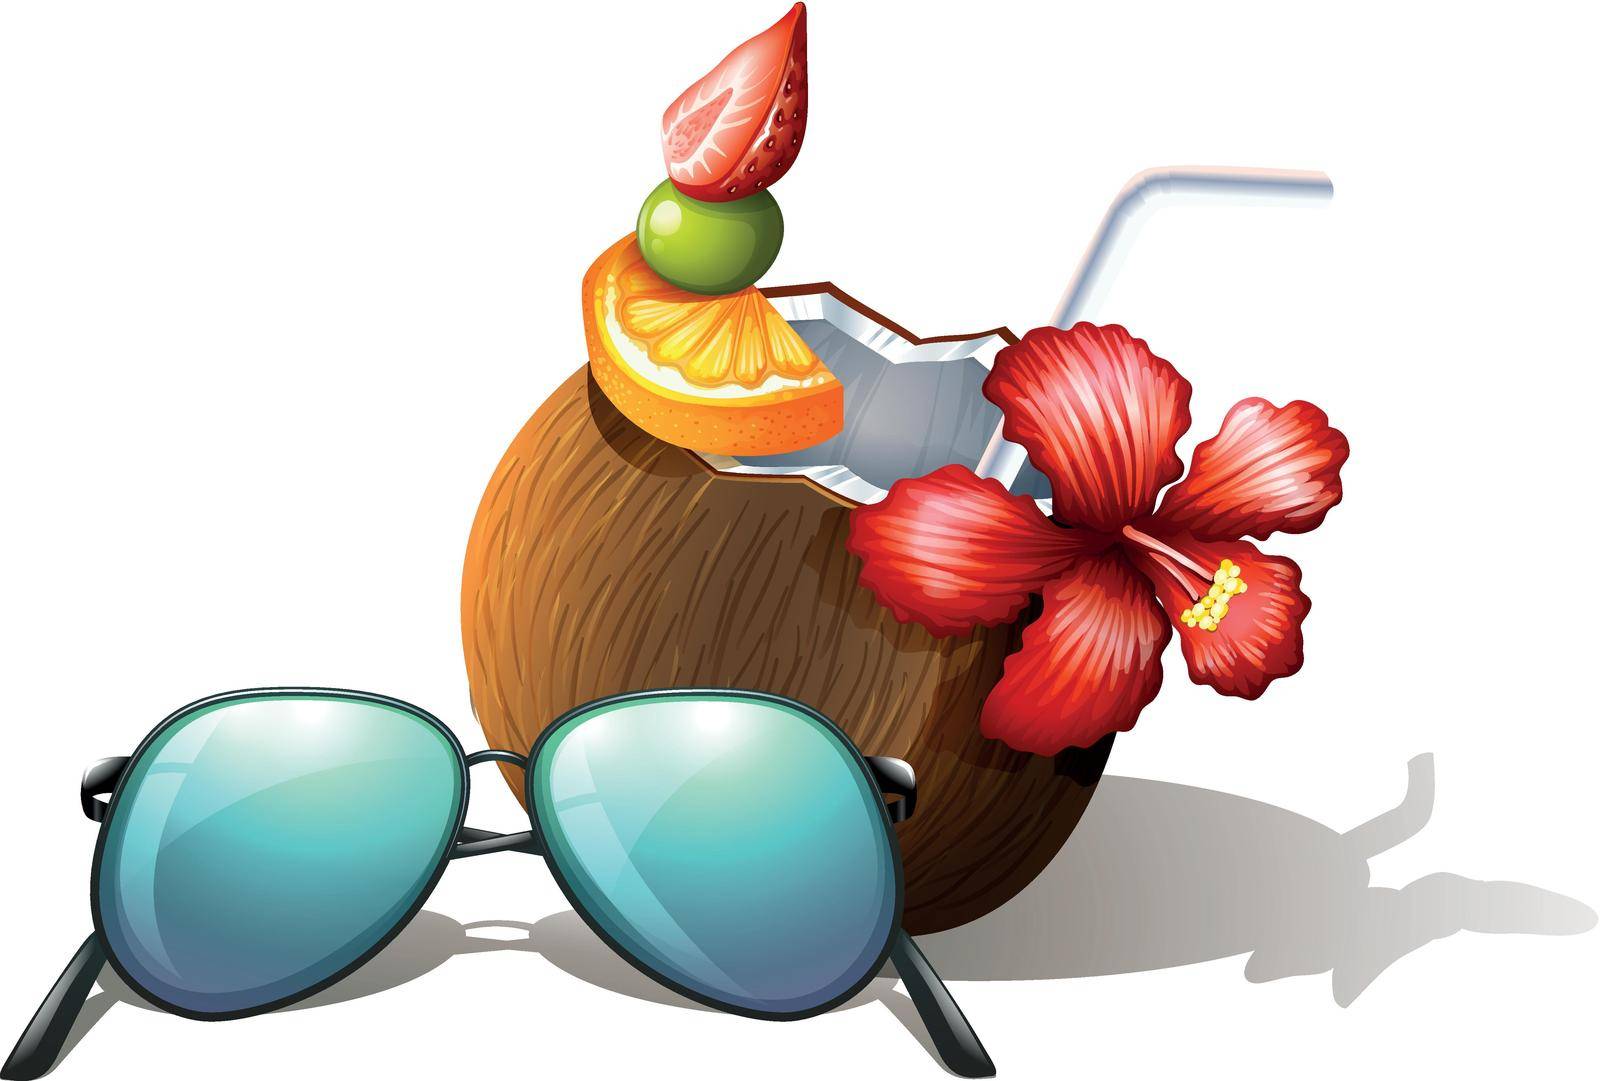 lllustration of a refreshing drink and a sunglasses for a beach outing on a white background